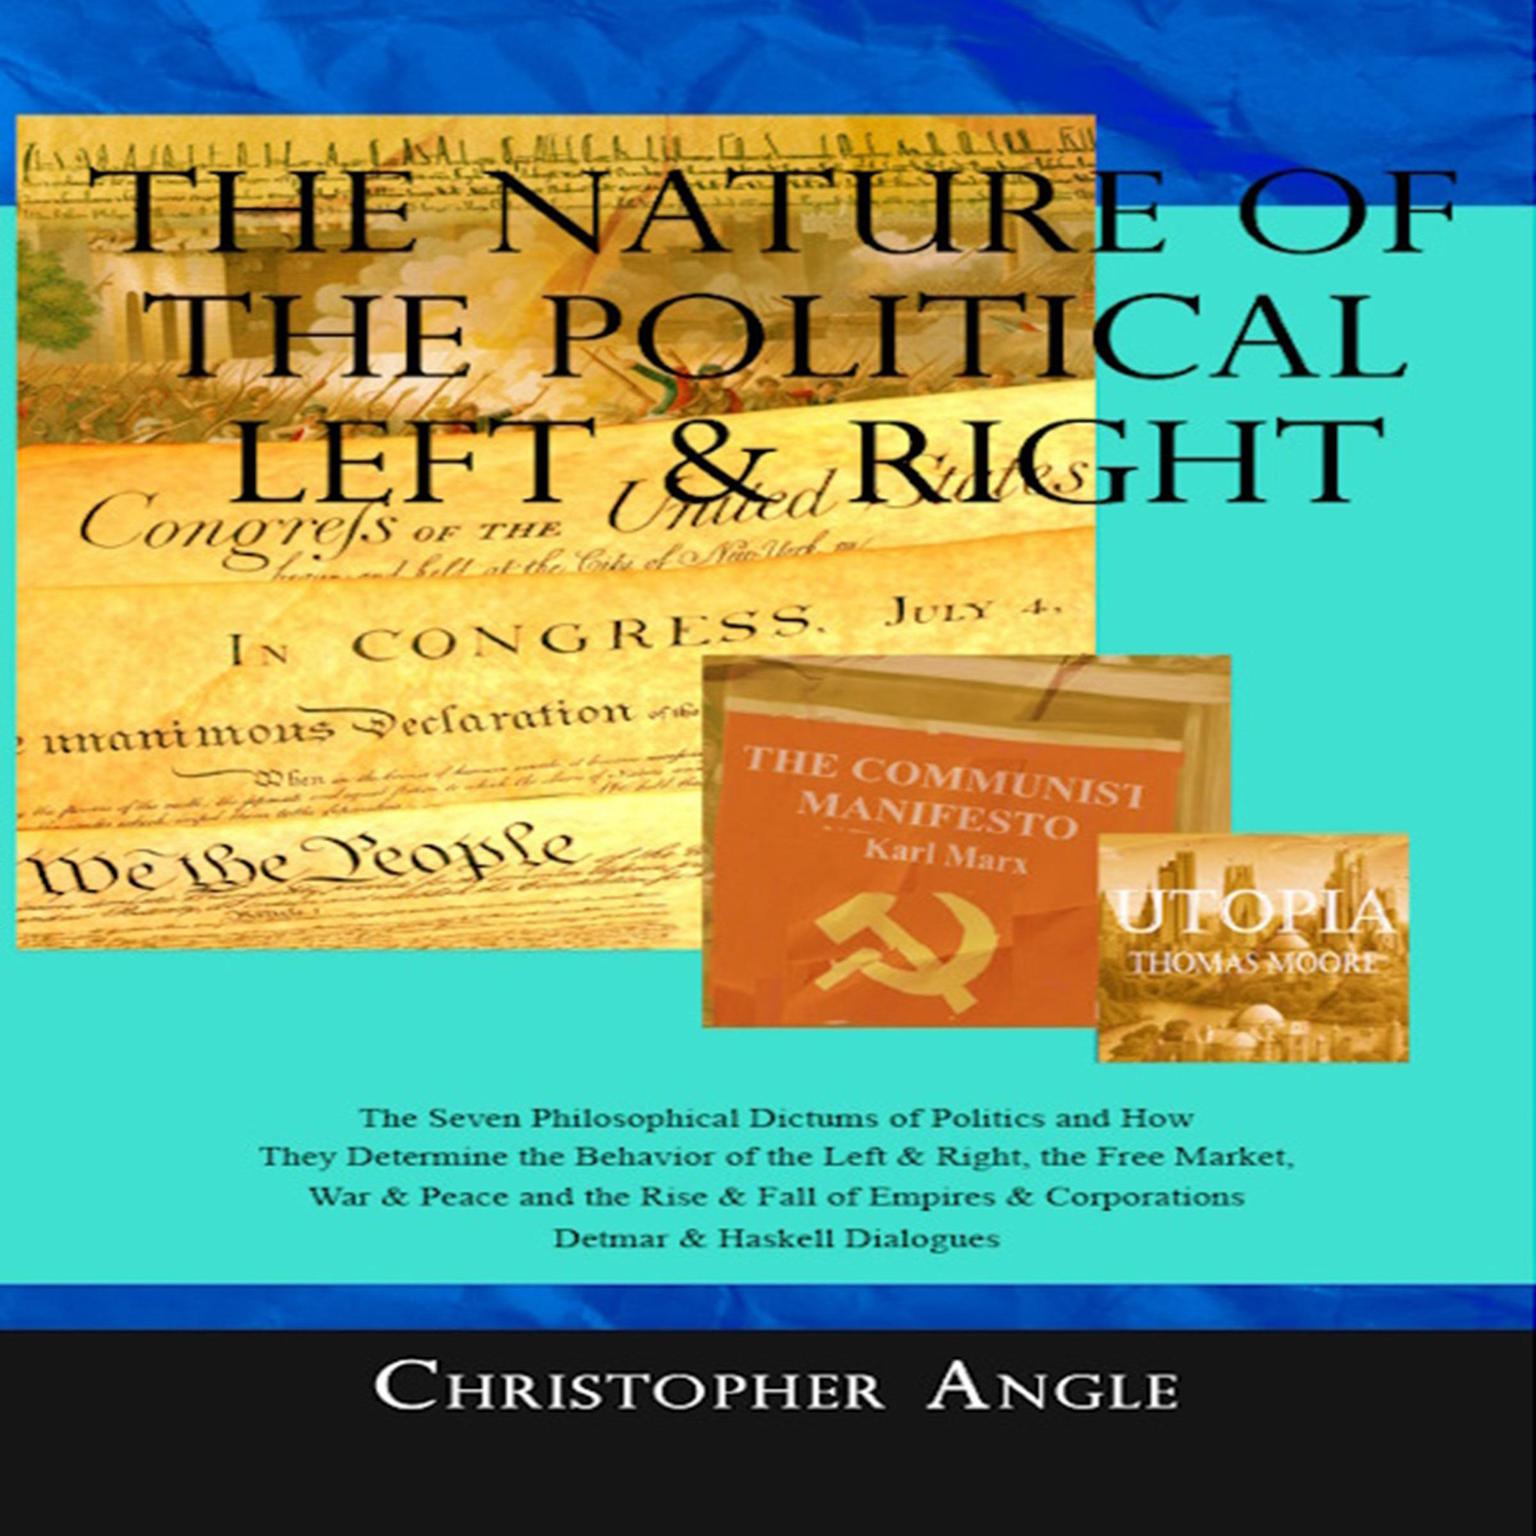 The Nature of the Political Left & Right: The Seven Philosophical Dictums of Politics and How They Determine the Behavior of the Left & Right, the Free Market, War & Peace, the Rise & Fall of Empires & Corporations Audiobook, by Christopher Angle